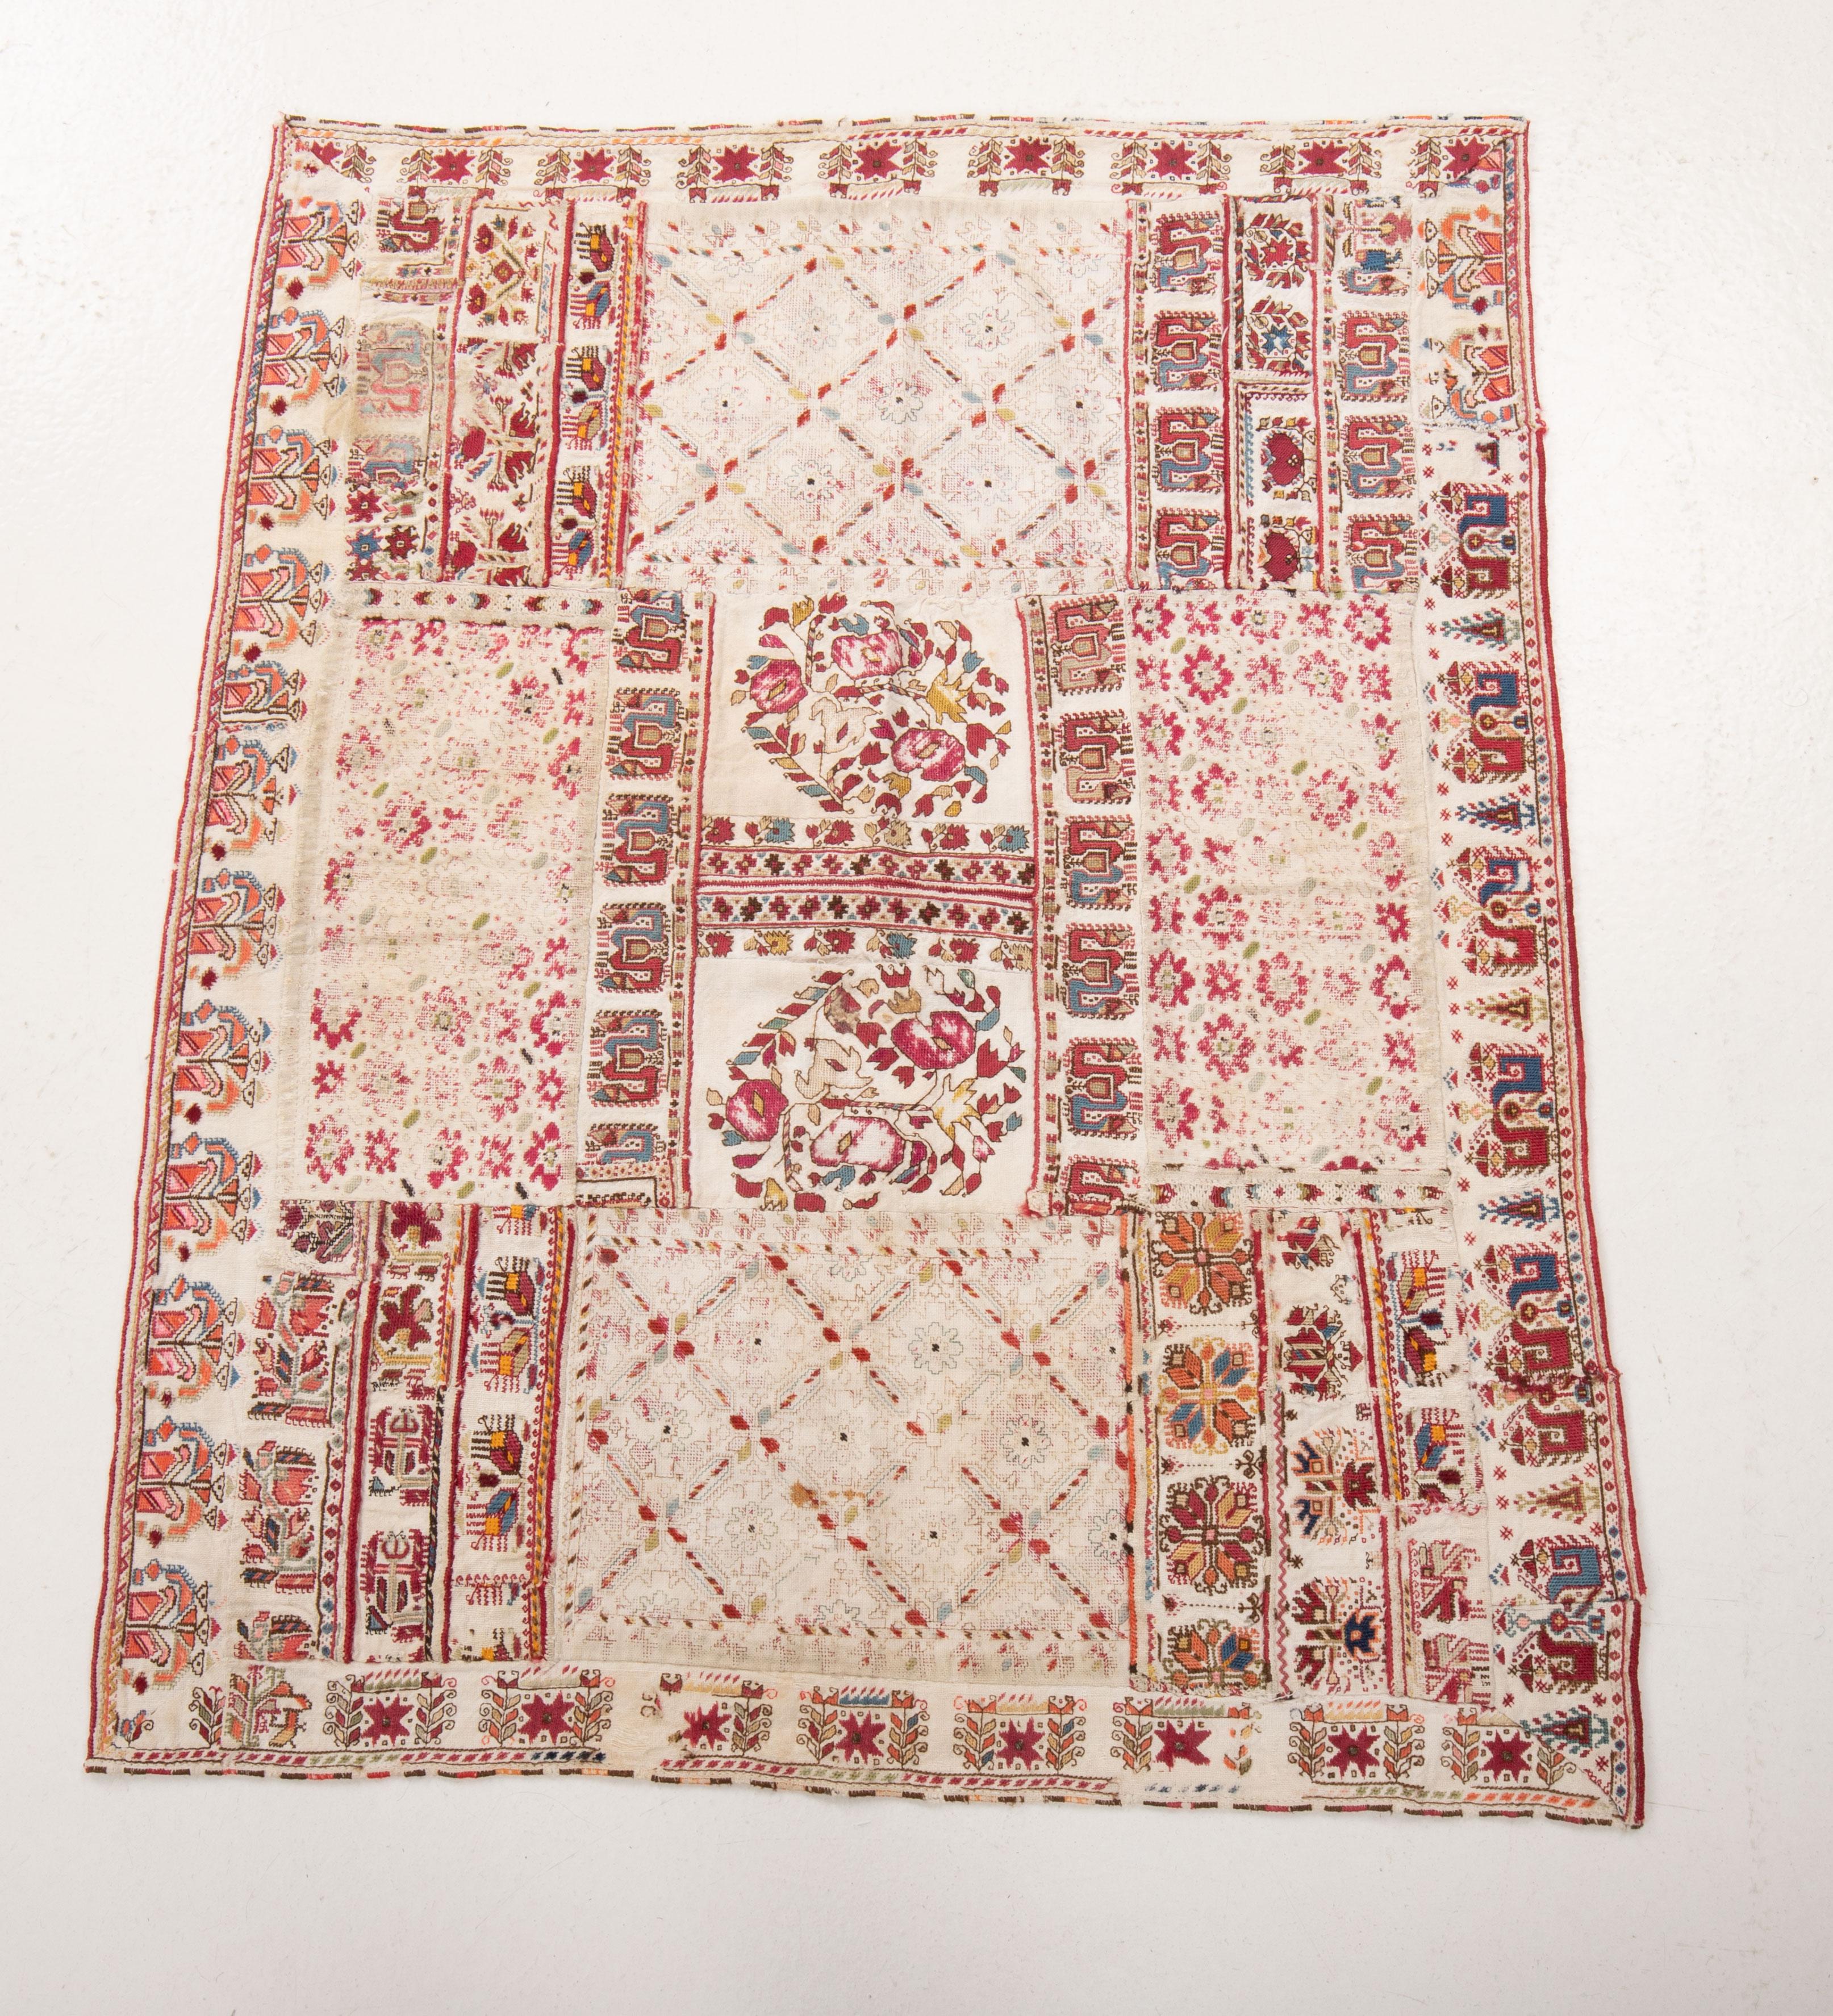 A composite square , composed from different embroideries , displays the features of this type of work from the Balkans.